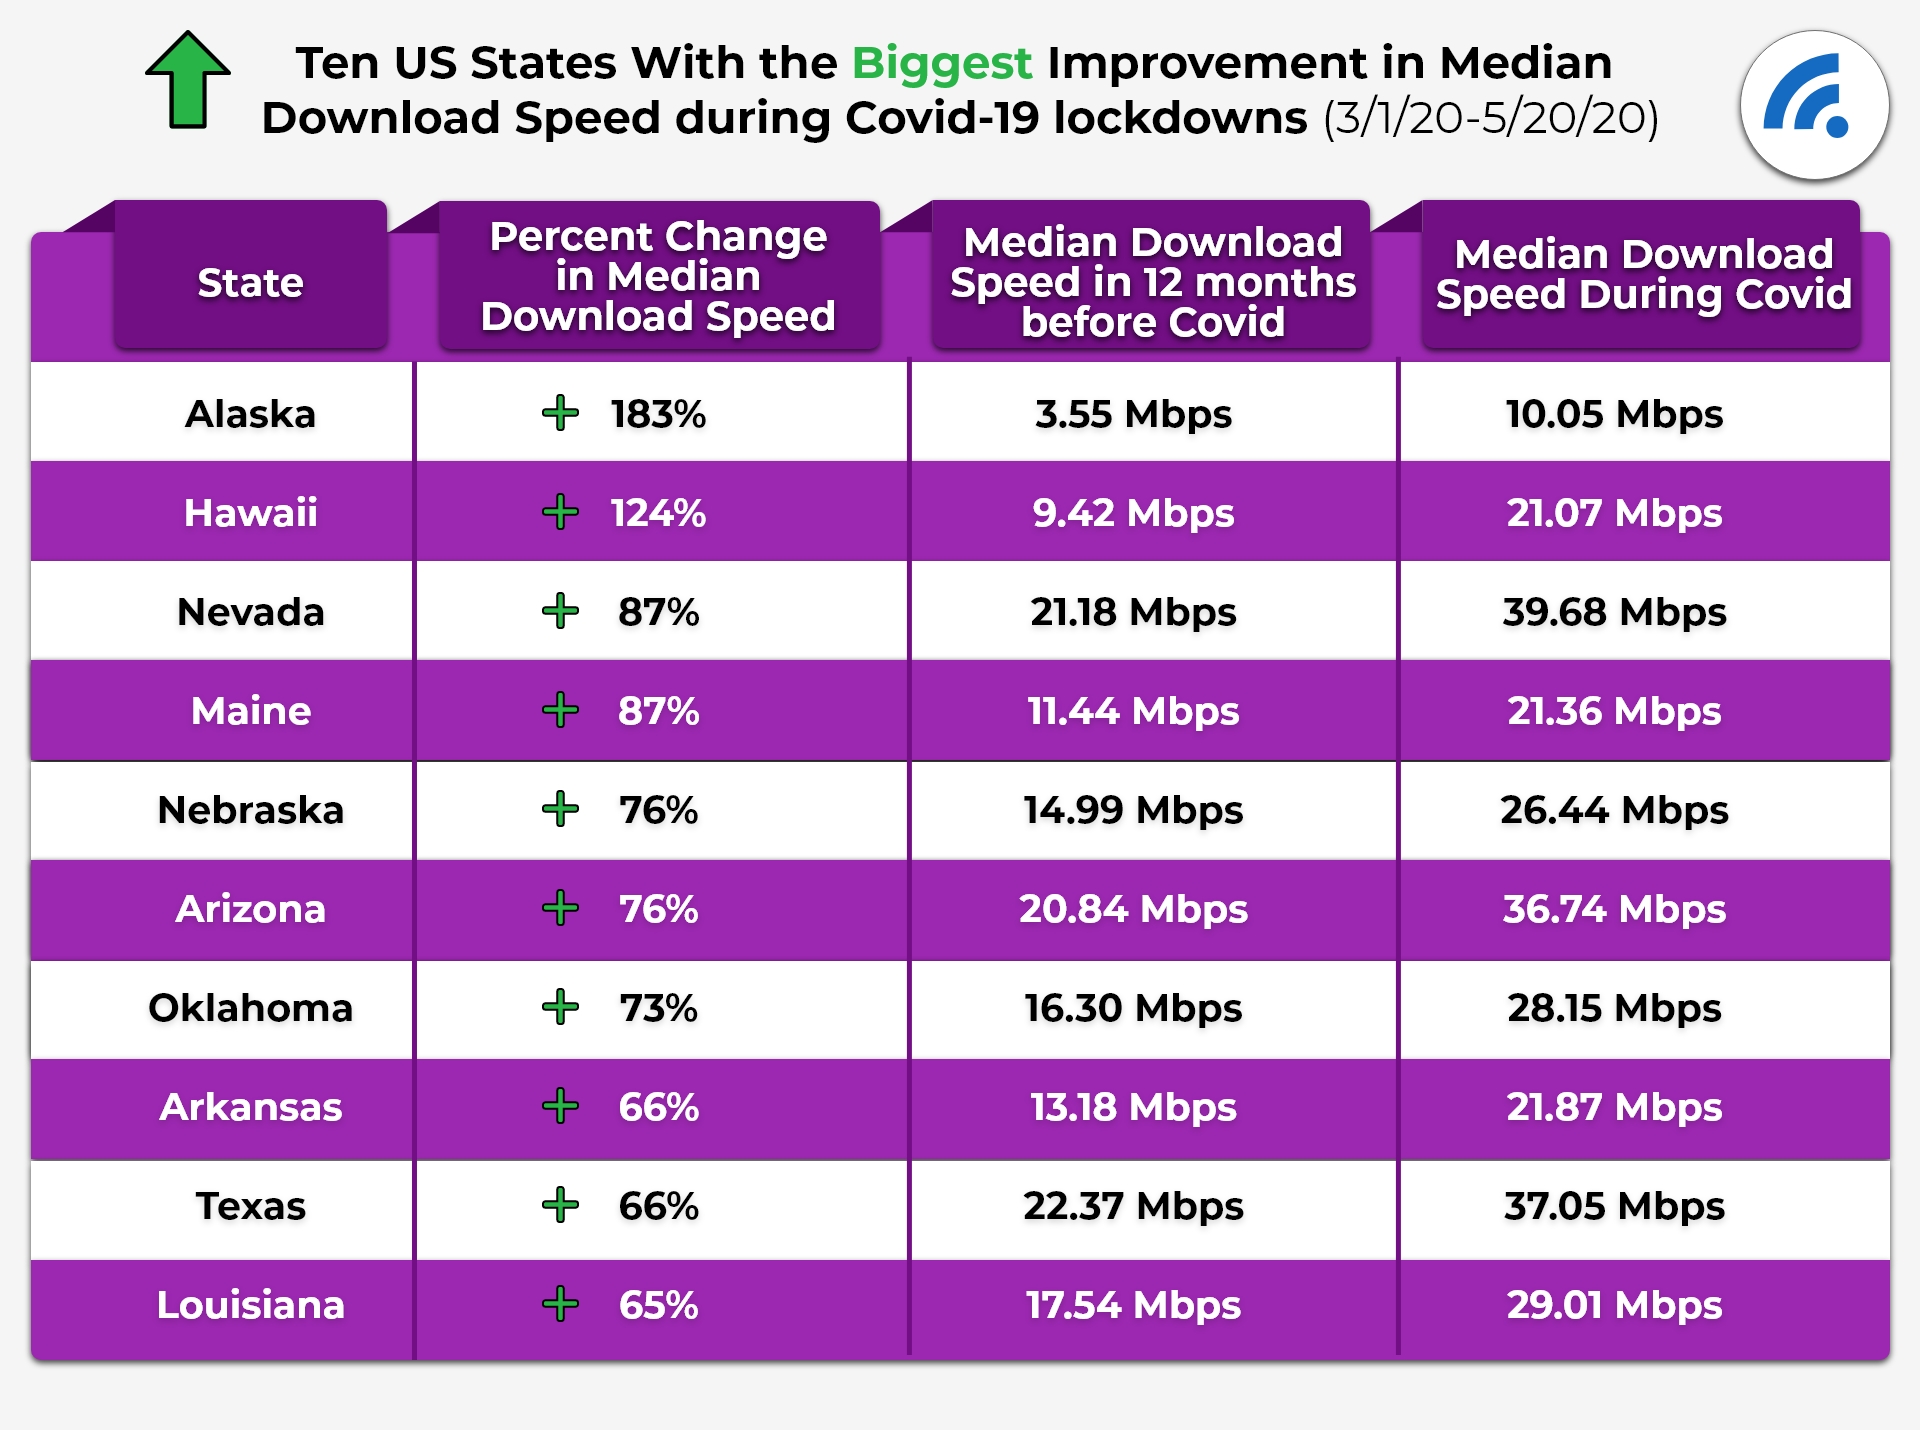 States With The Biggest Improvements In Dowload Speed During COVID-19 Lockdowns